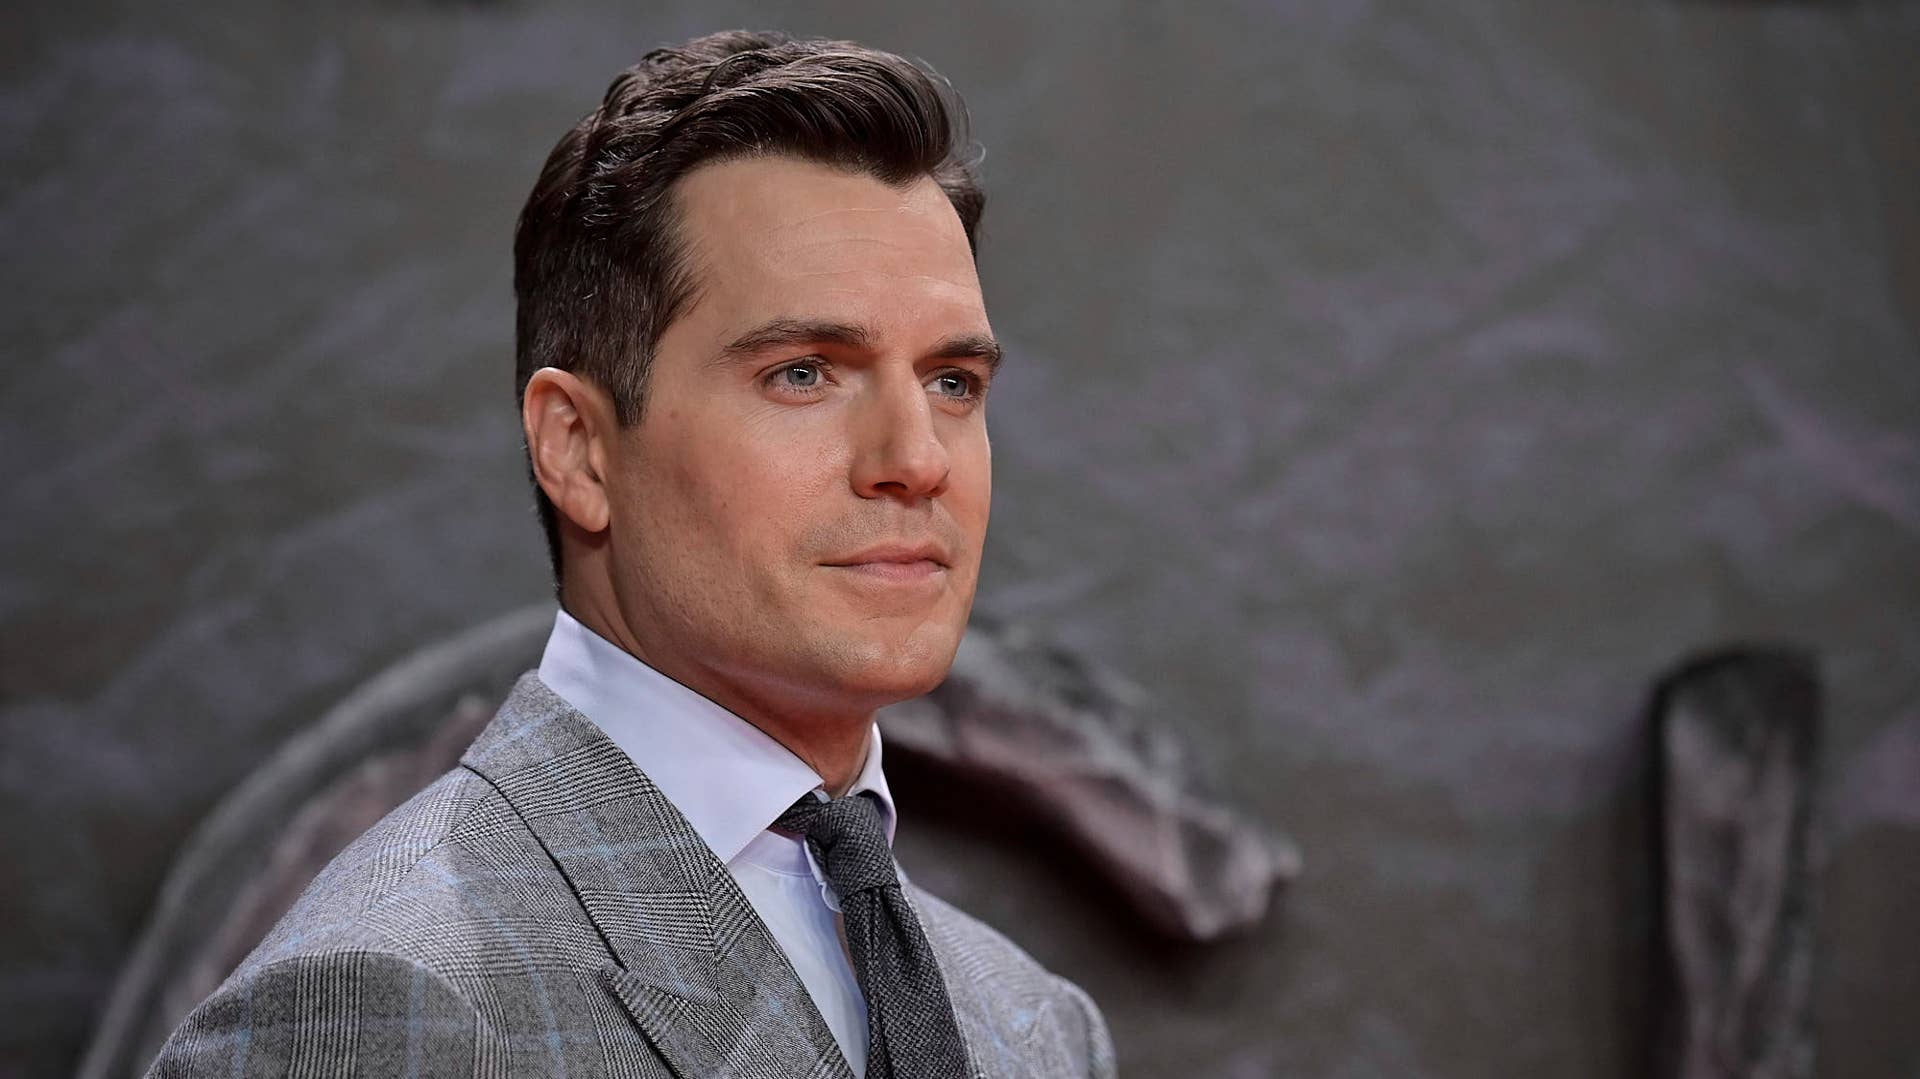 Henry Cavill attends "The Witcher" season 2 premiere.